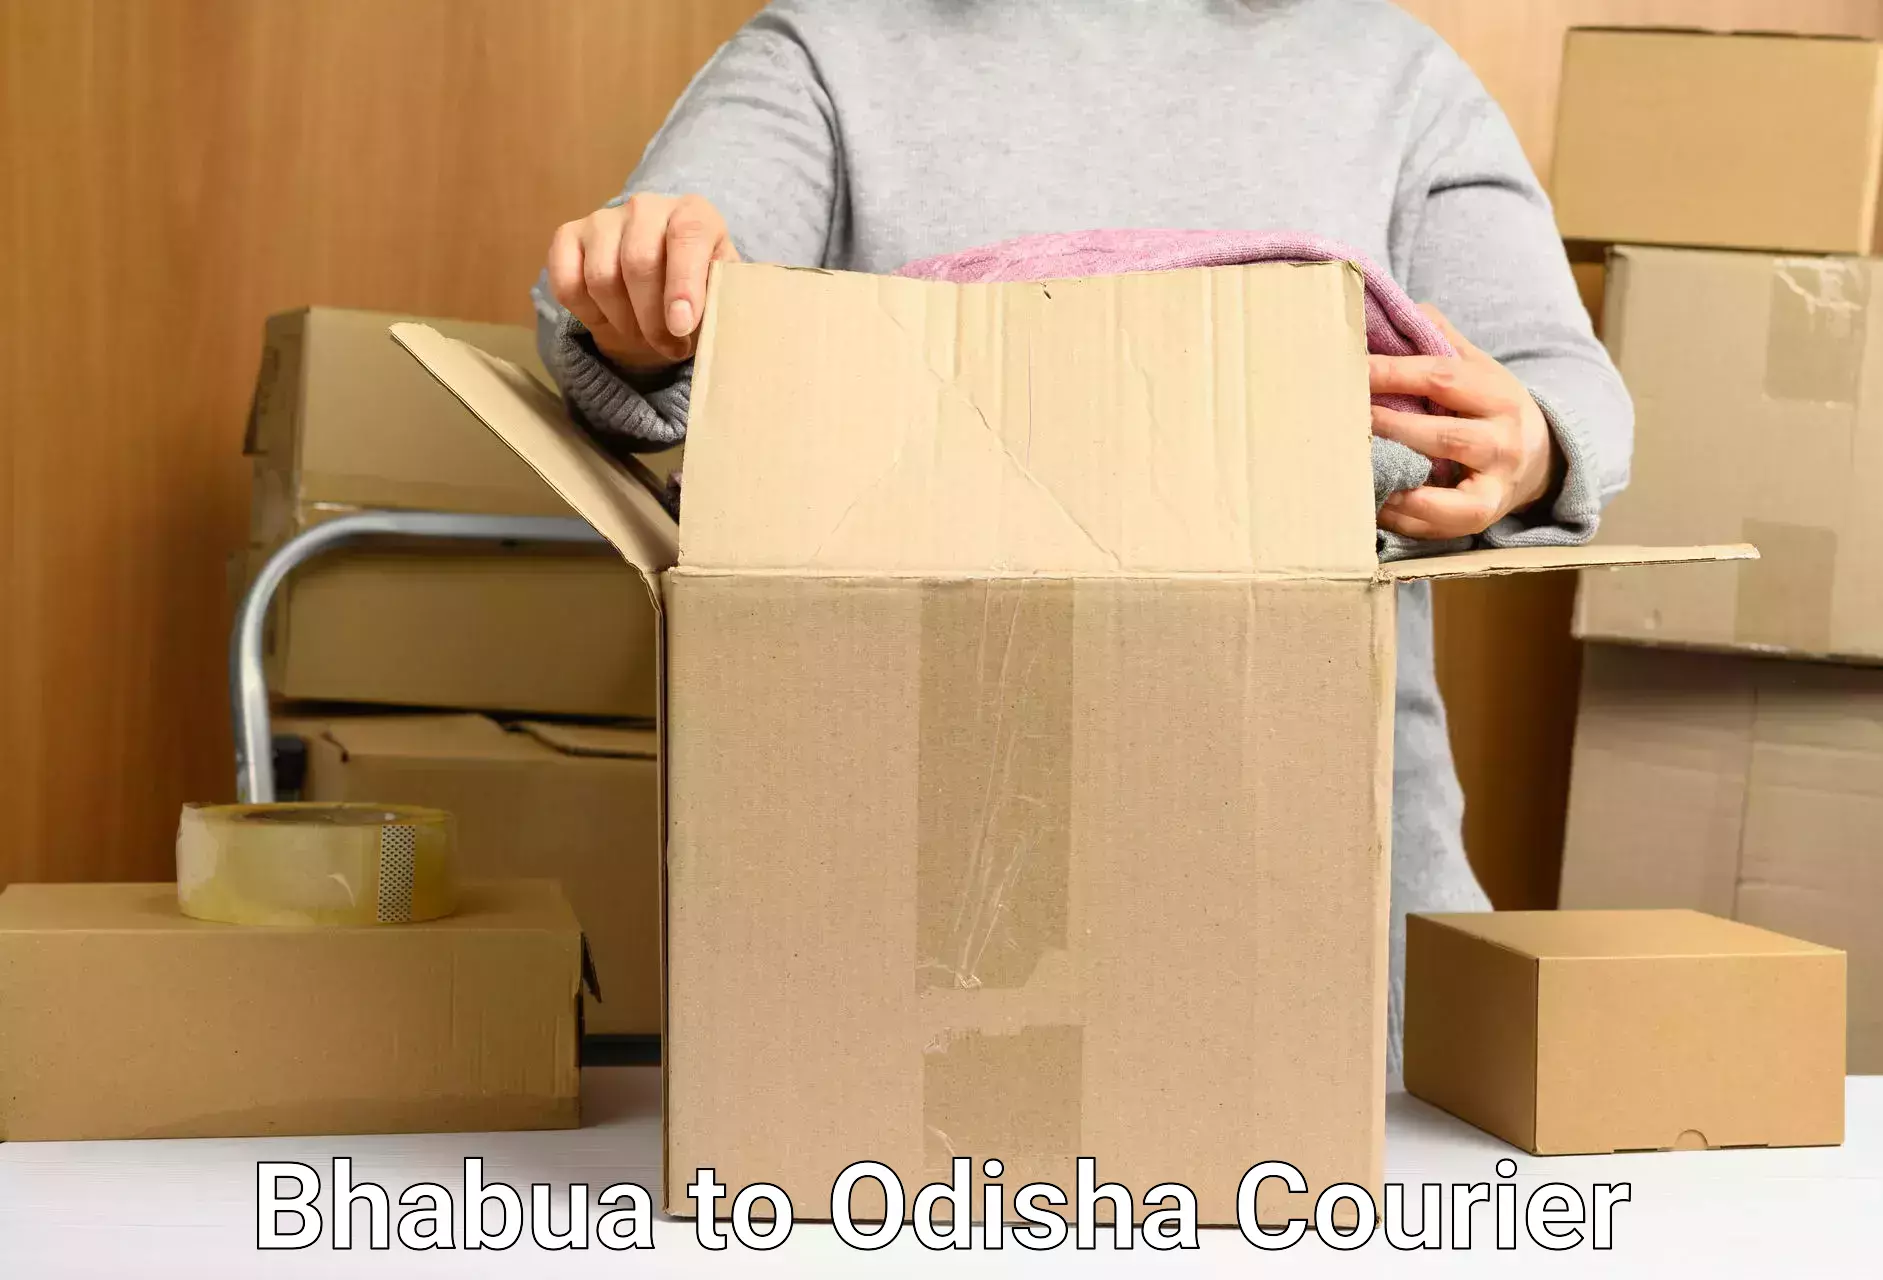 Flexible parcel services in Bhabua to Chatrapur